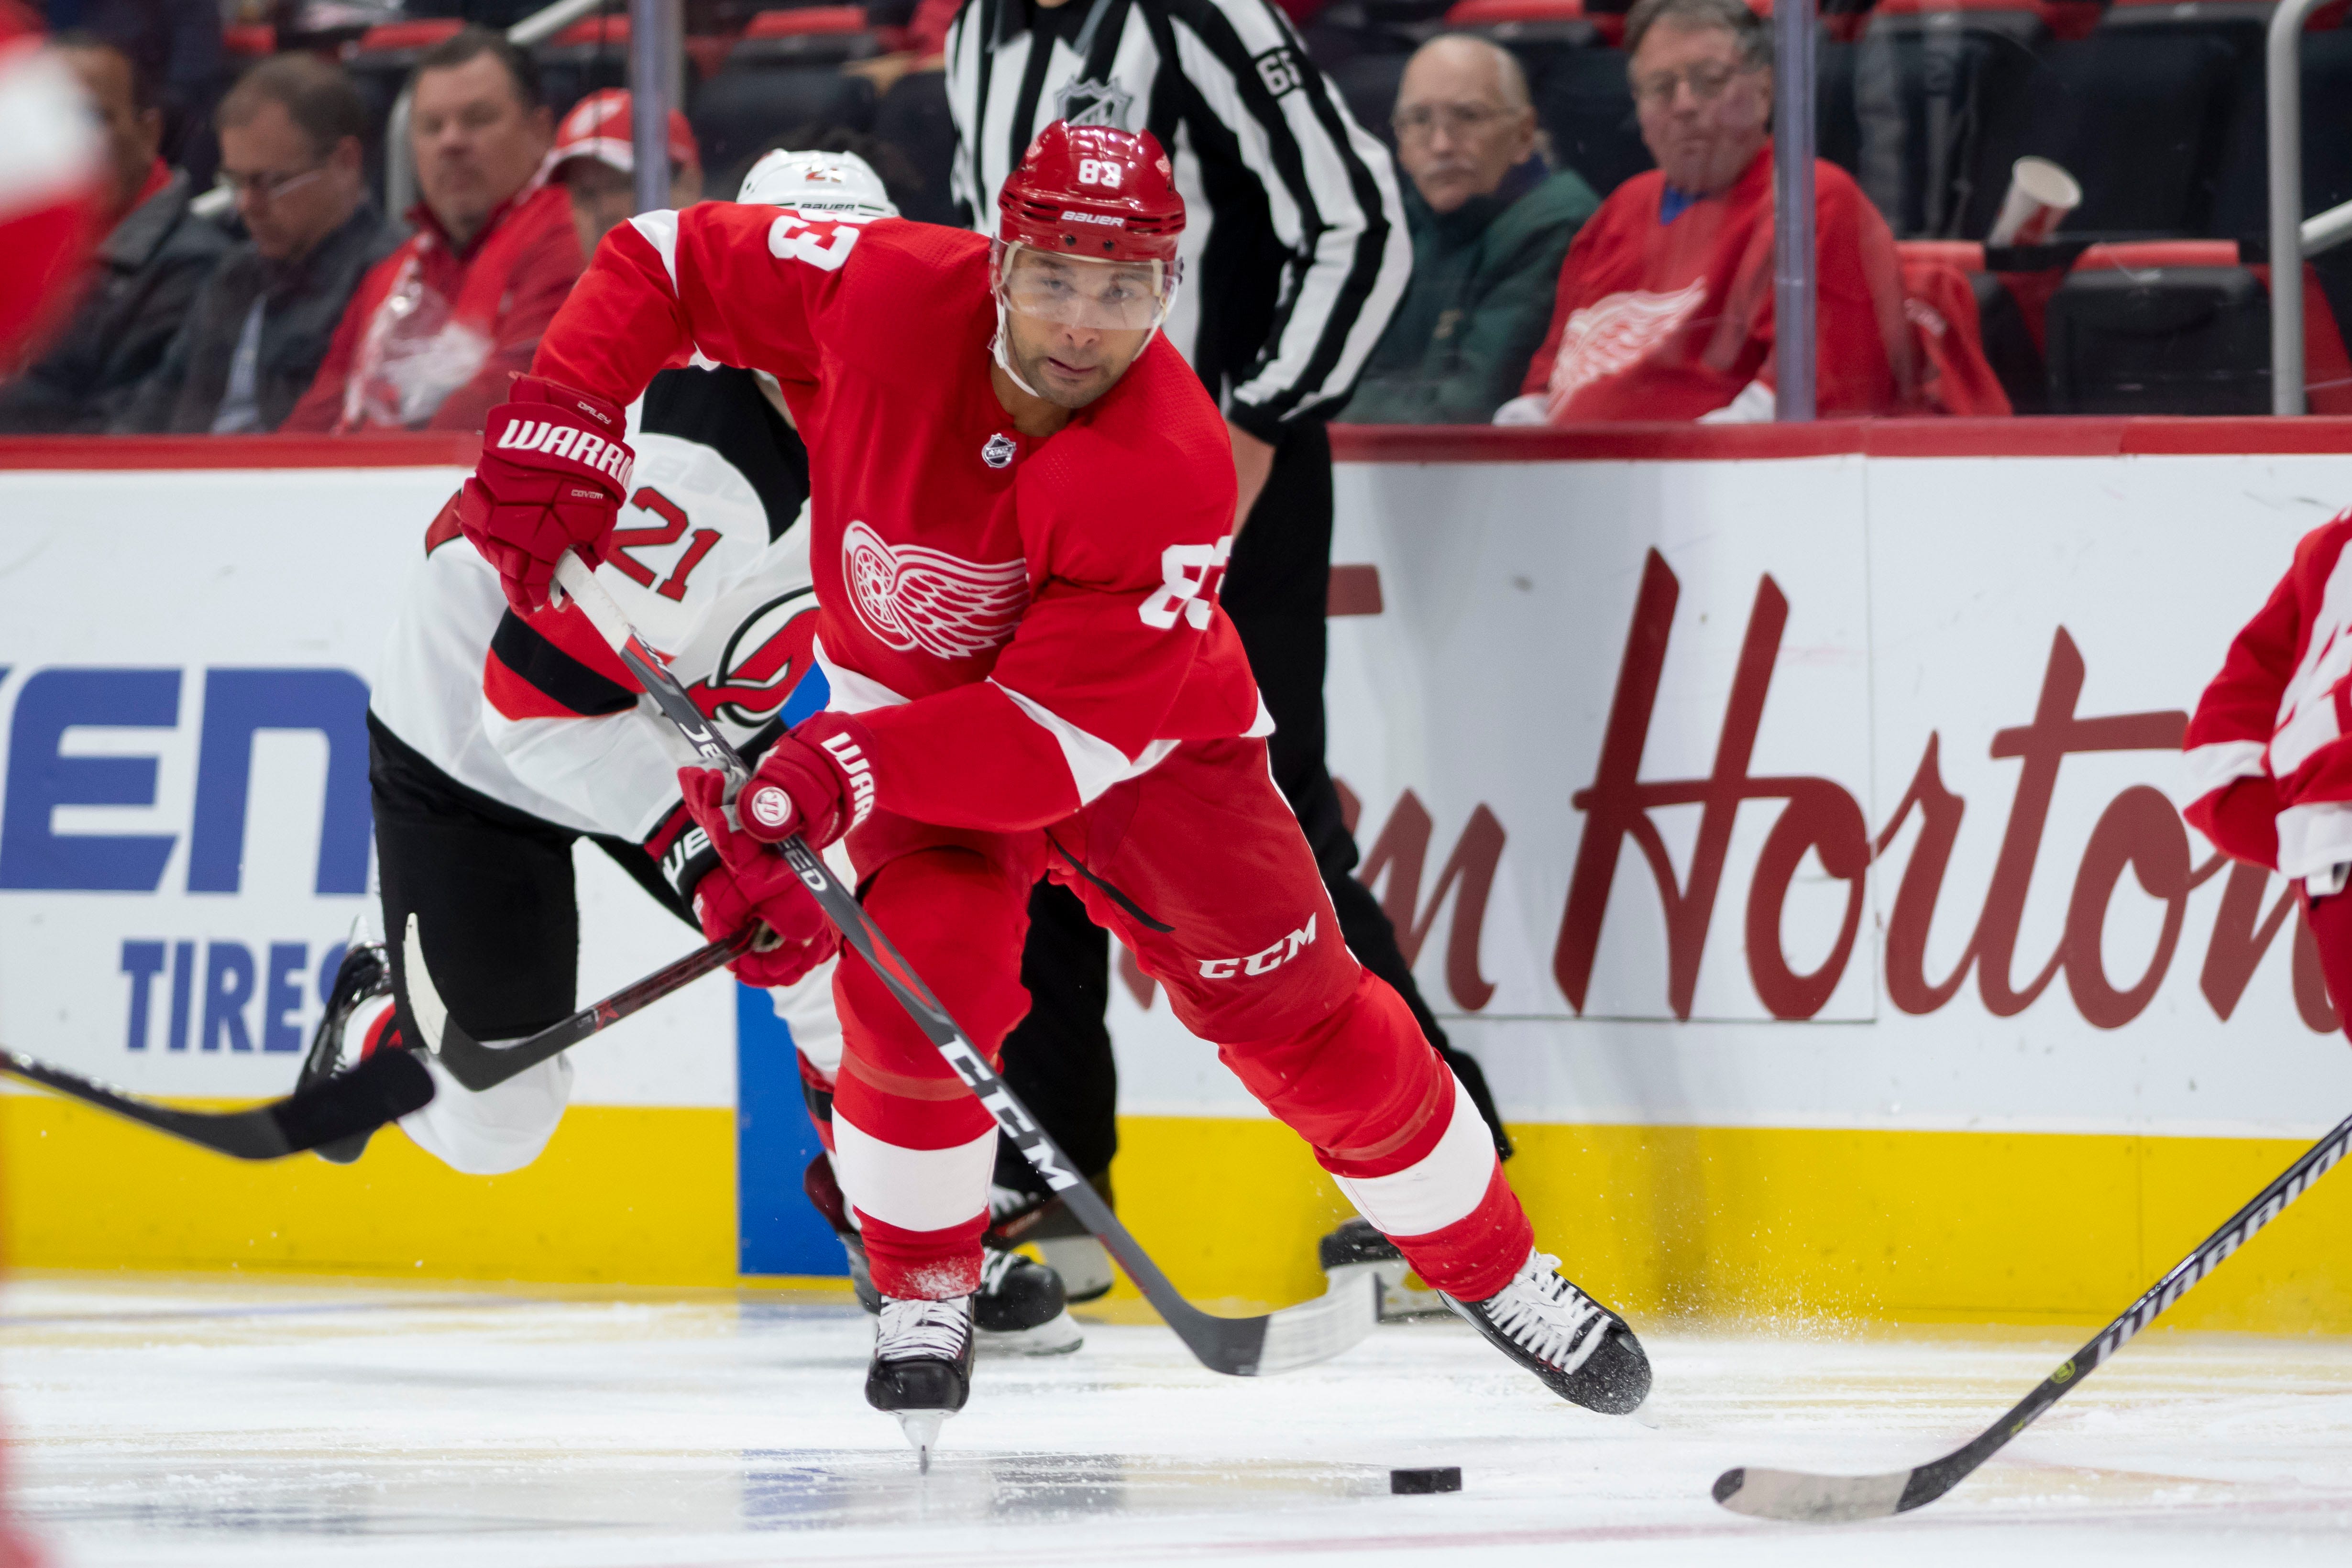 17. Trevor Daley, defenseman. Entering the final year of his three-year contract with the Wings, Daley, 35, was limited to 44 games because of injuries. His greatest benefit to the Wings at this point might be he’ll be an attractive asset at the trade deadline for a team searching for quality depth.